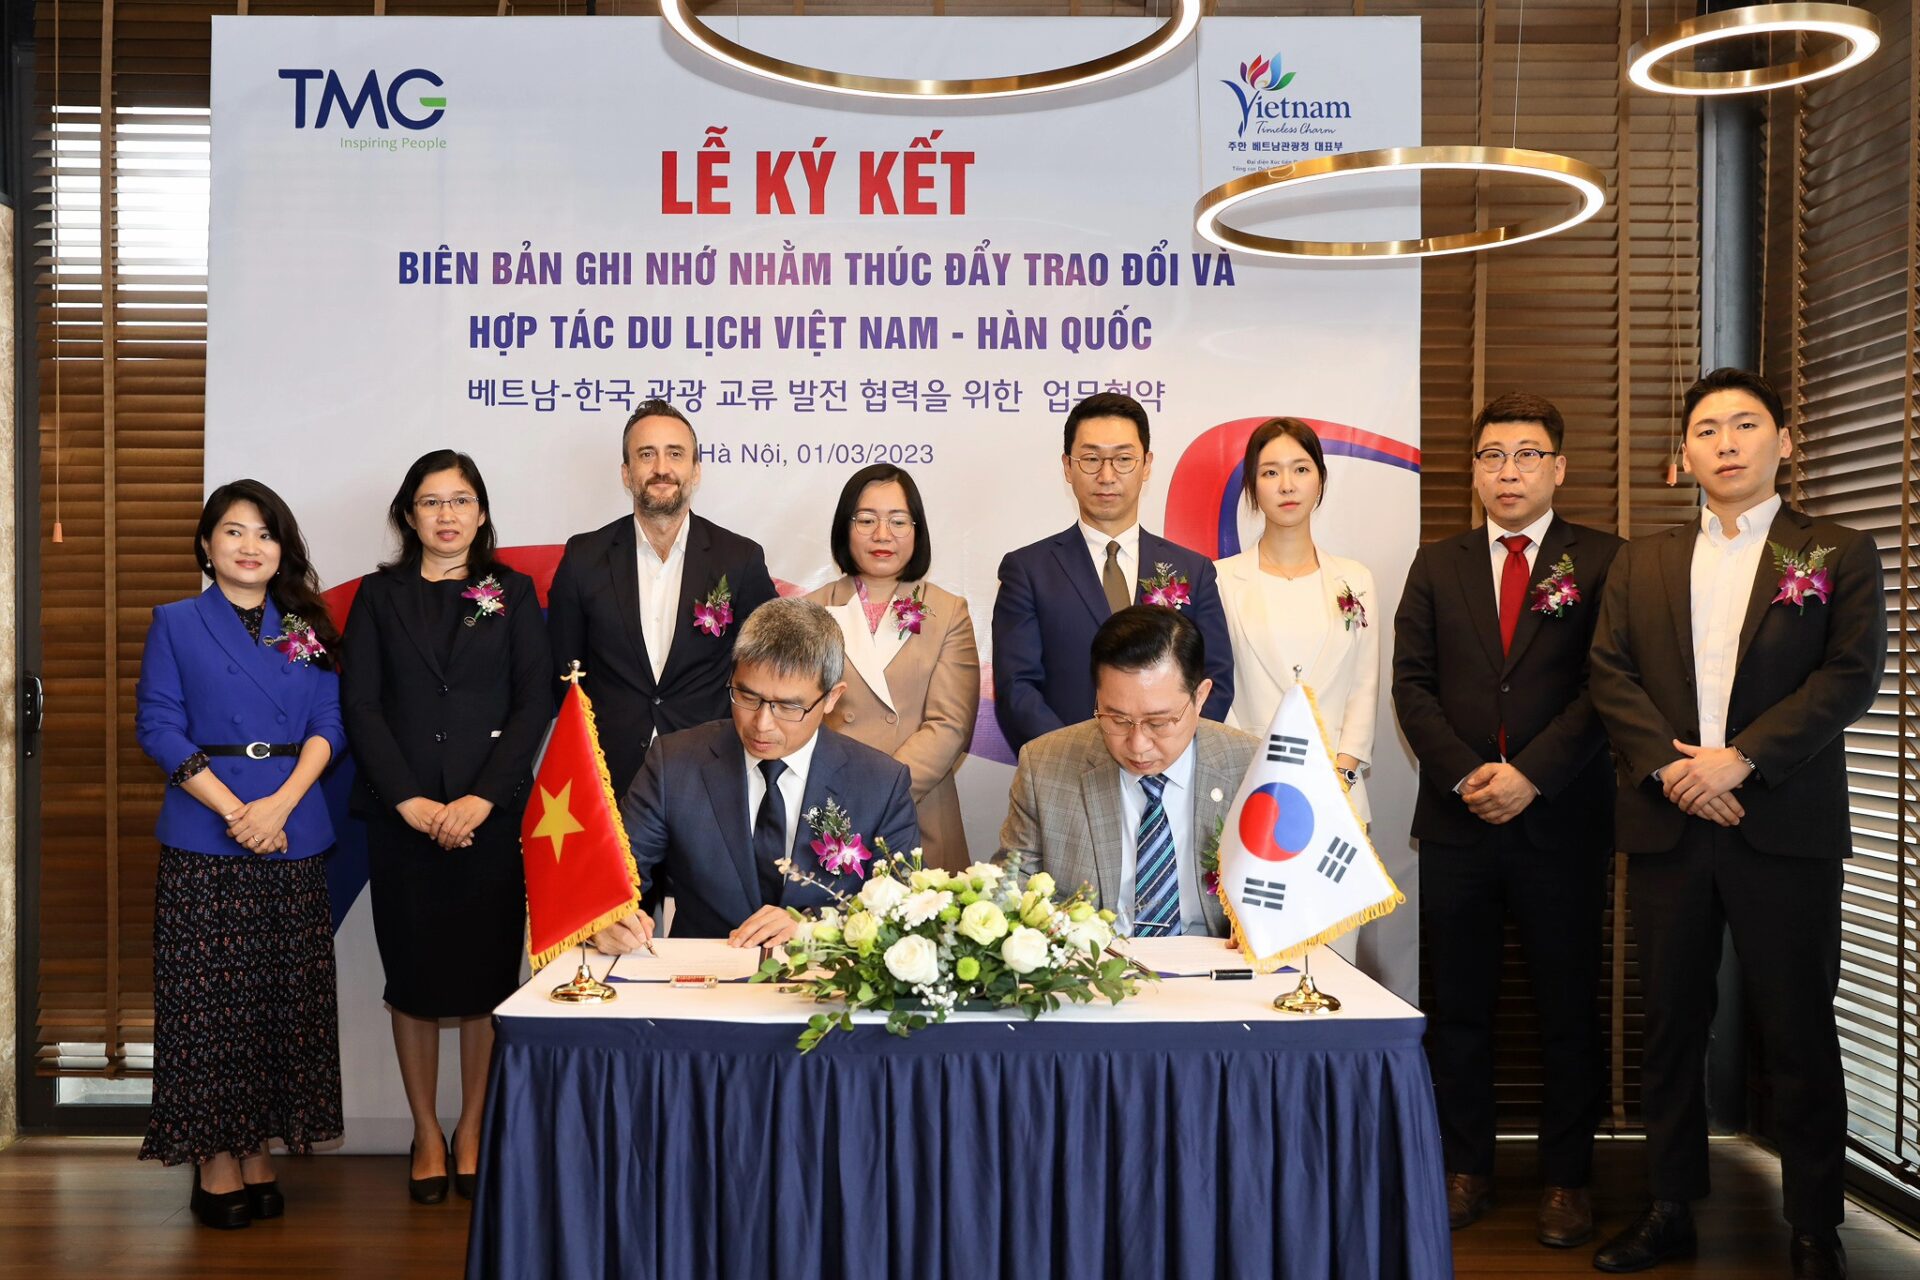 TMG Signs An MOU With The Vietnam National Administration of Tourism’s Representative Office in South Korea